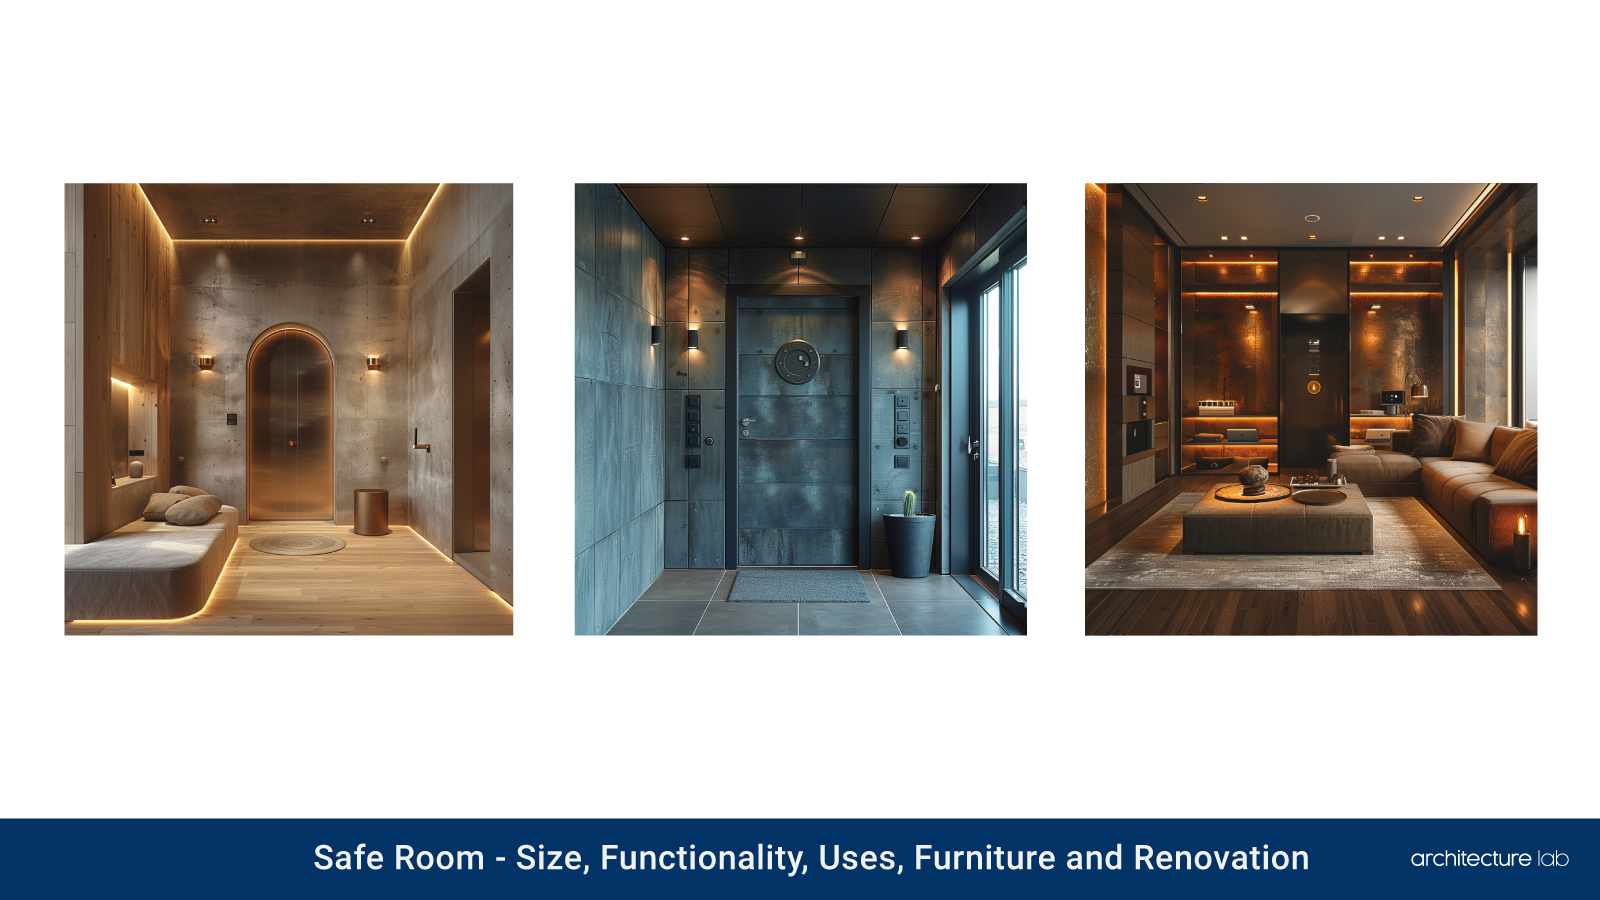 Safe room: size, functionality, uses, furniture and renovation